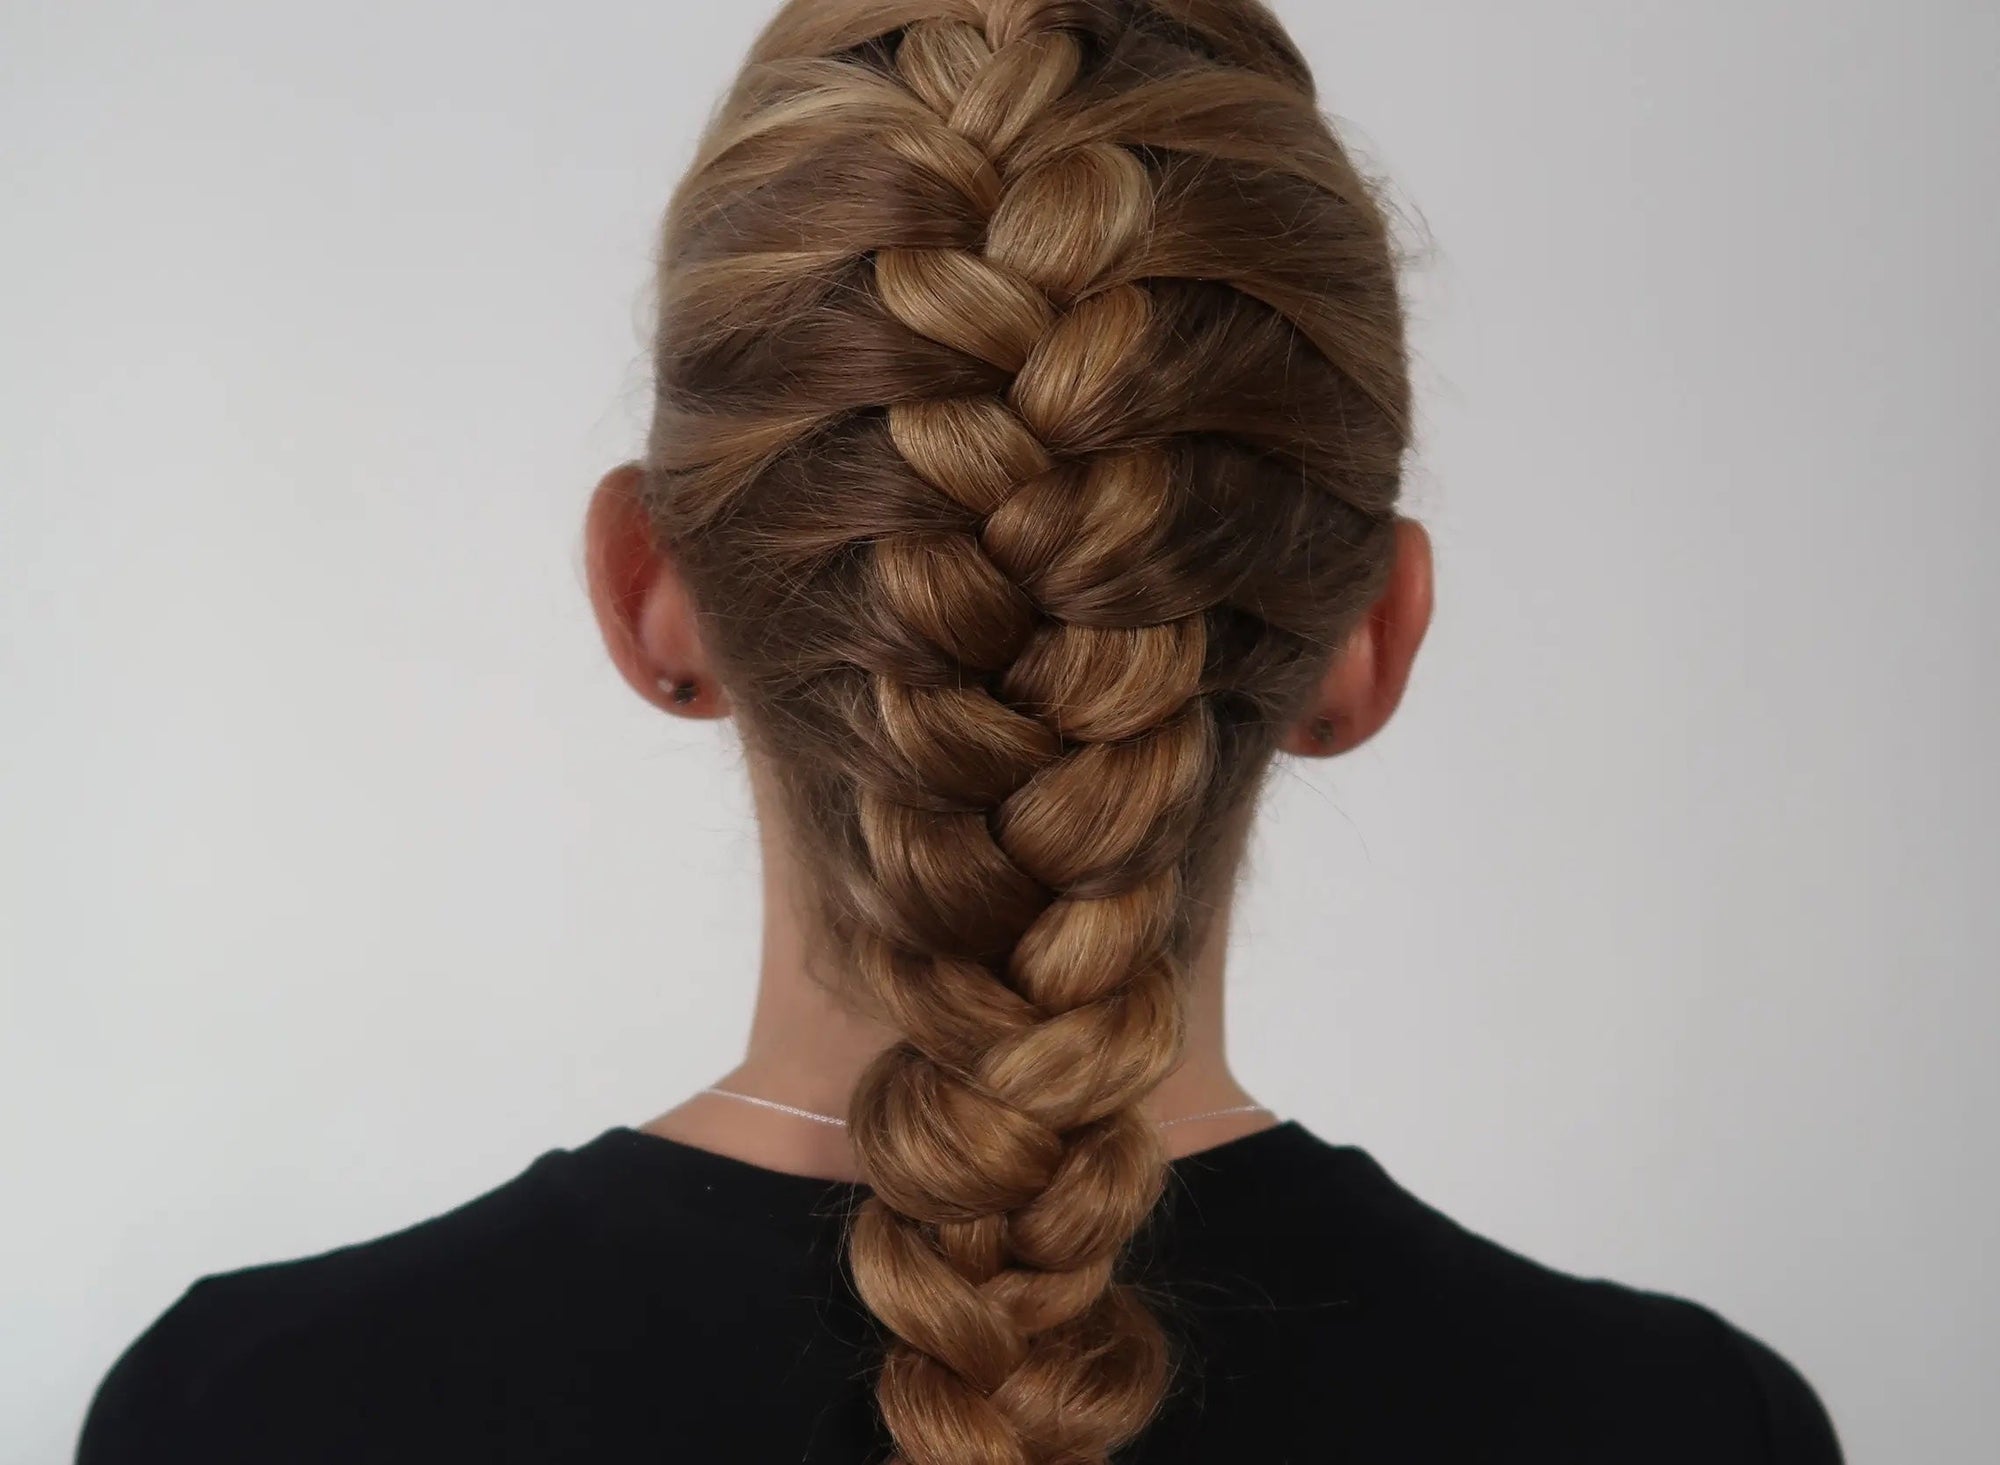 An Uncomplicated Guide to Braiding Your Own Hair